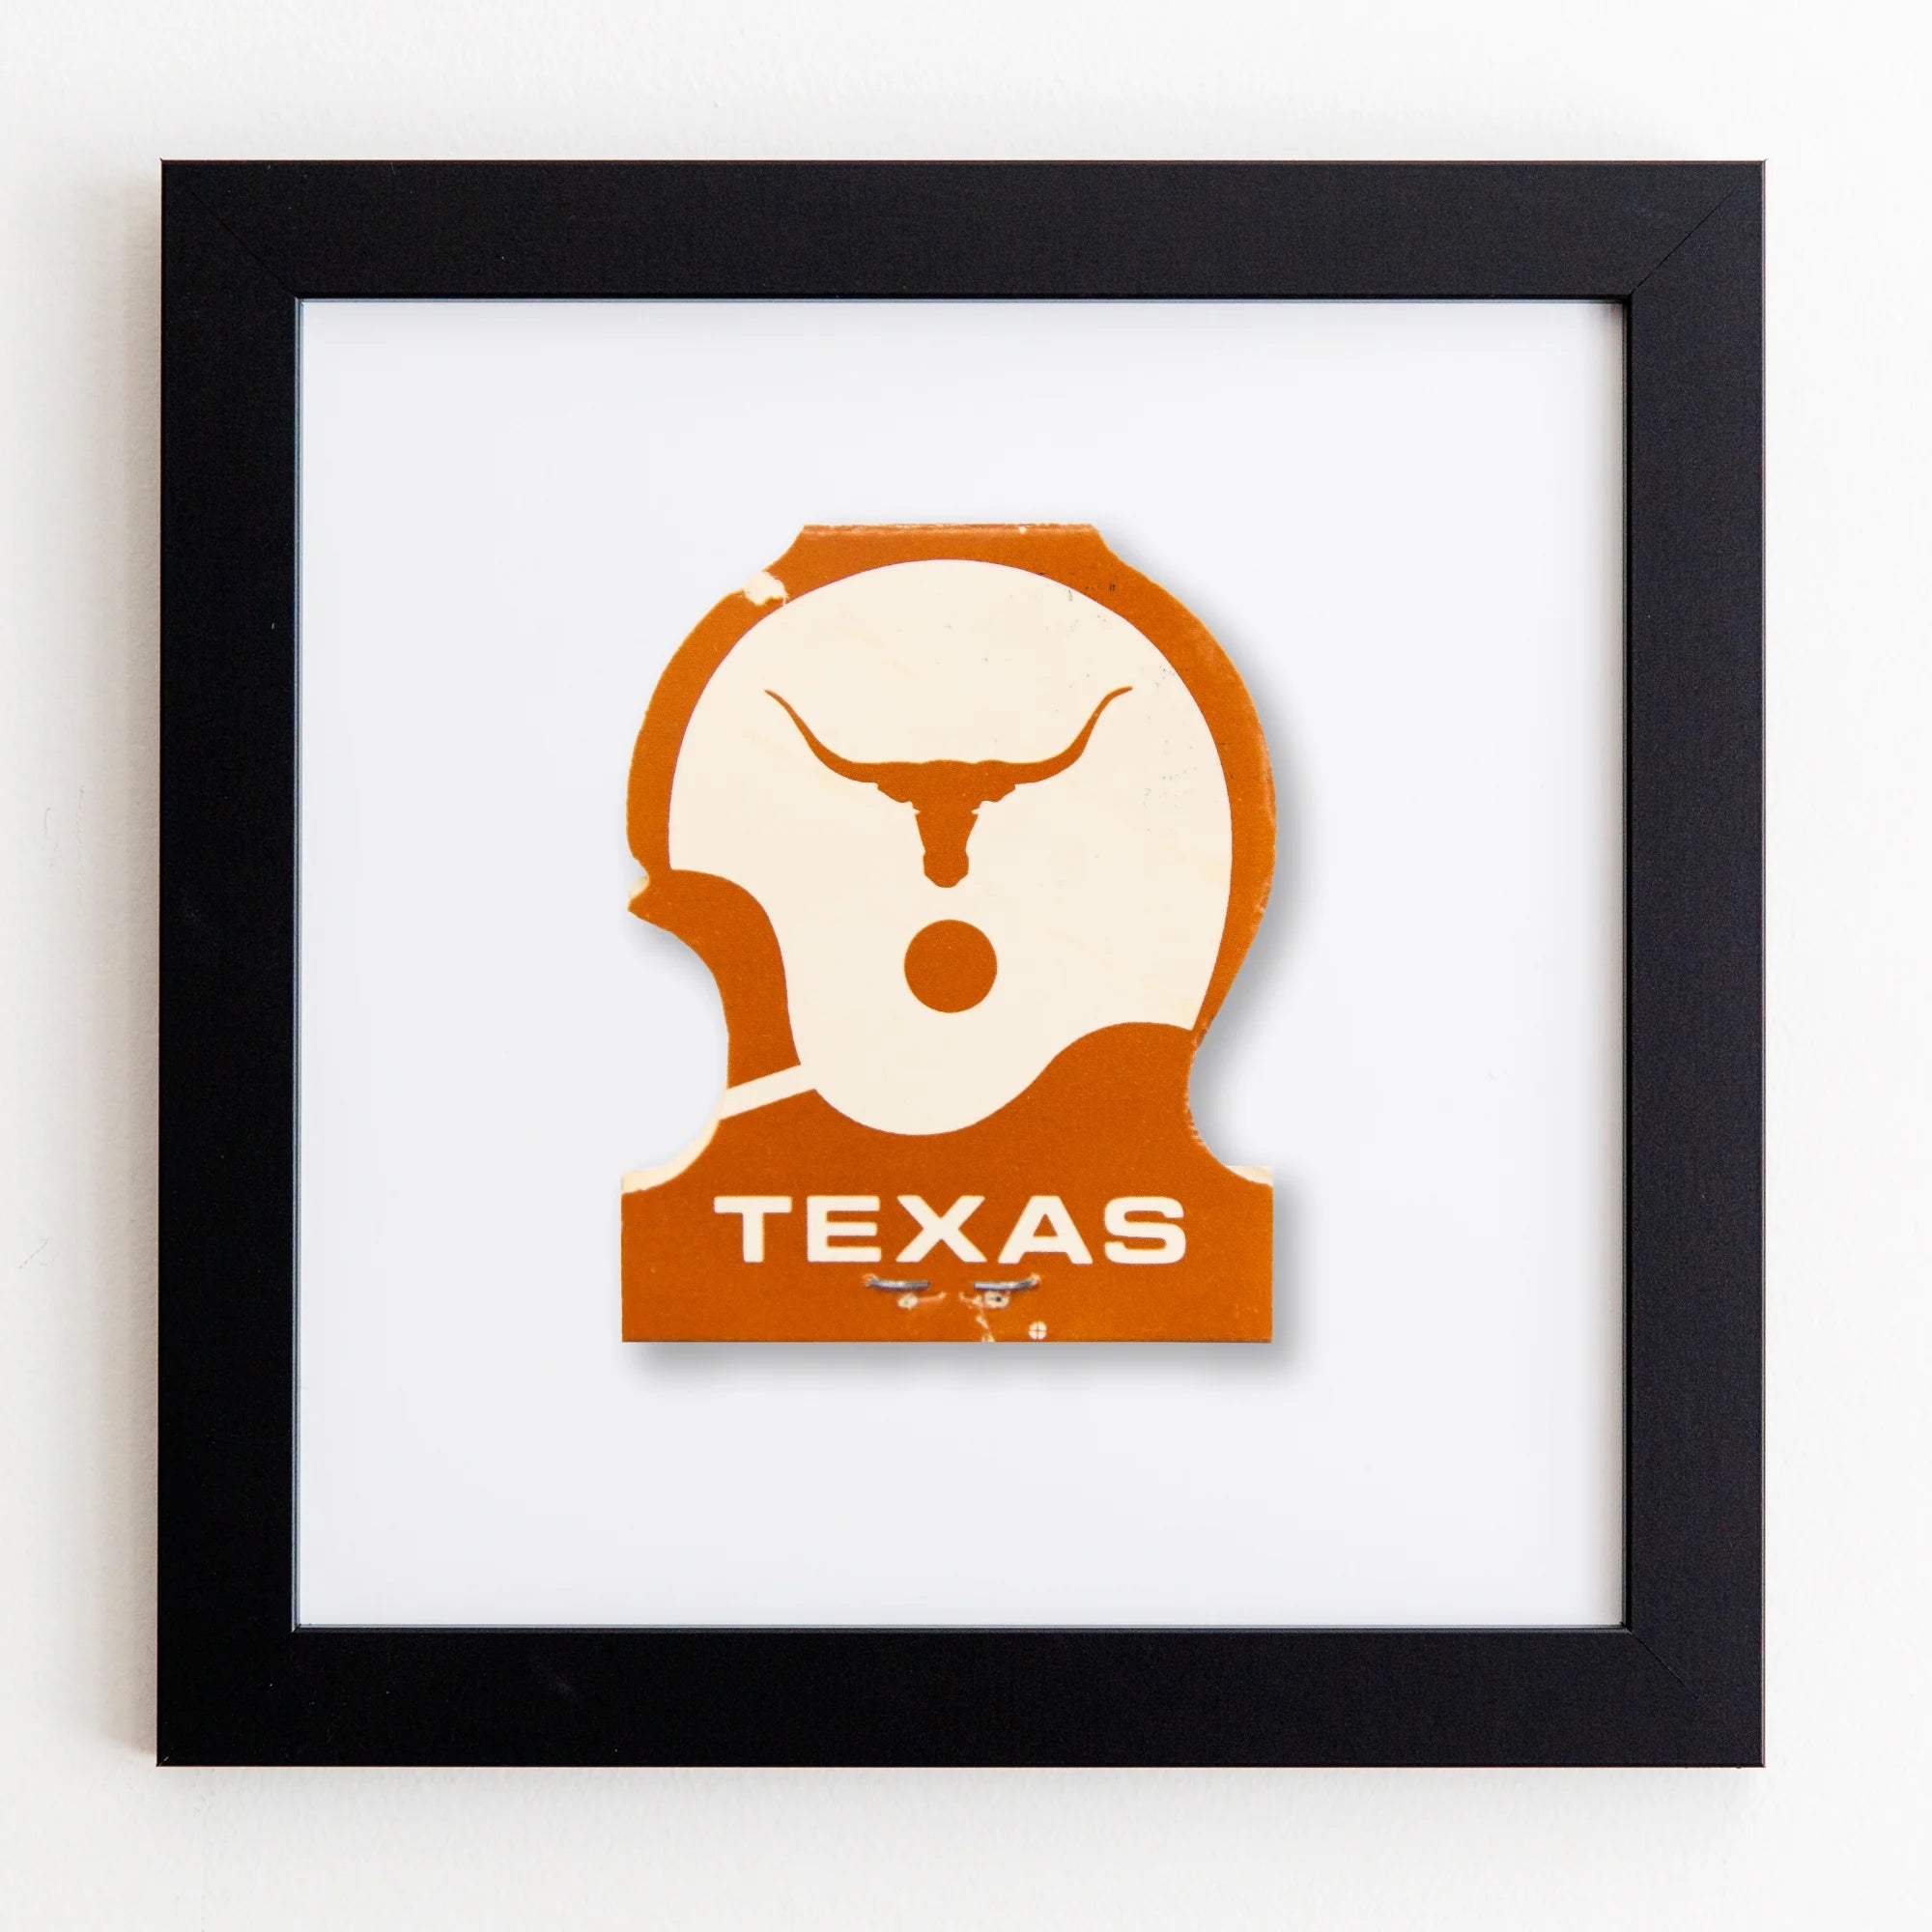 A framed artwork featuring a stylized silhouette of a longhorn&#39;s head in white acrylic on an orange background with &quot;TEXAS&quot; written below, all enclosed in a Match South Art Square Black Frame.